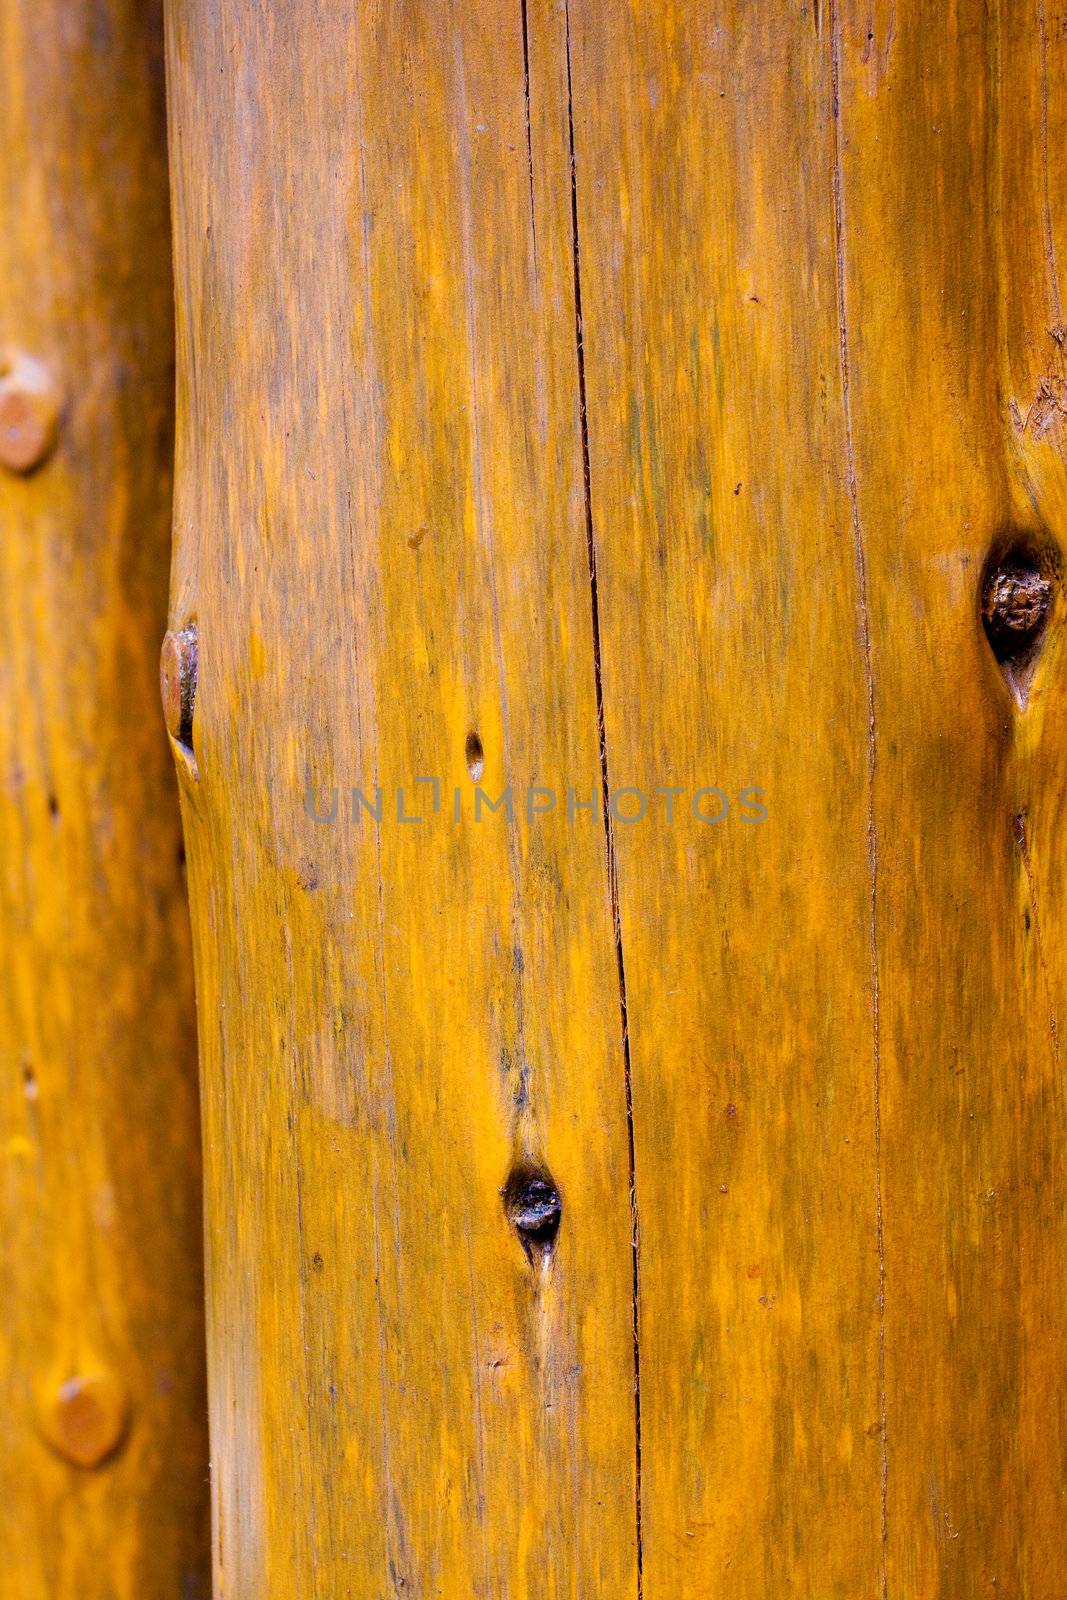 A background of wood grain creates a texture image in brown yellow. This is pine or fir in a vertical orientation.